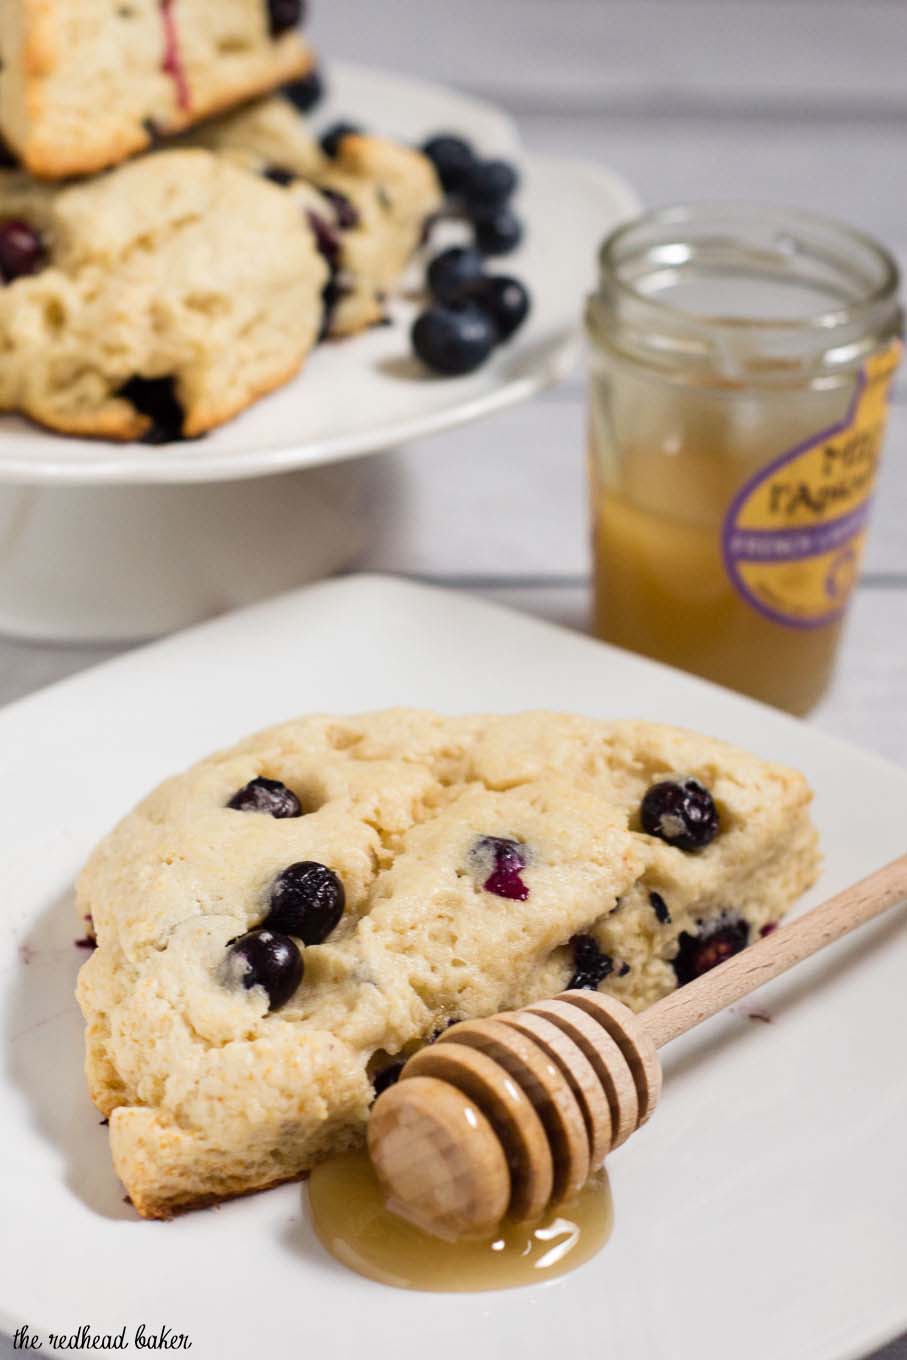 These blueberry scones are sweetened with lavender honey, whose floral sweetness is a delicious complement to the tangy berries.